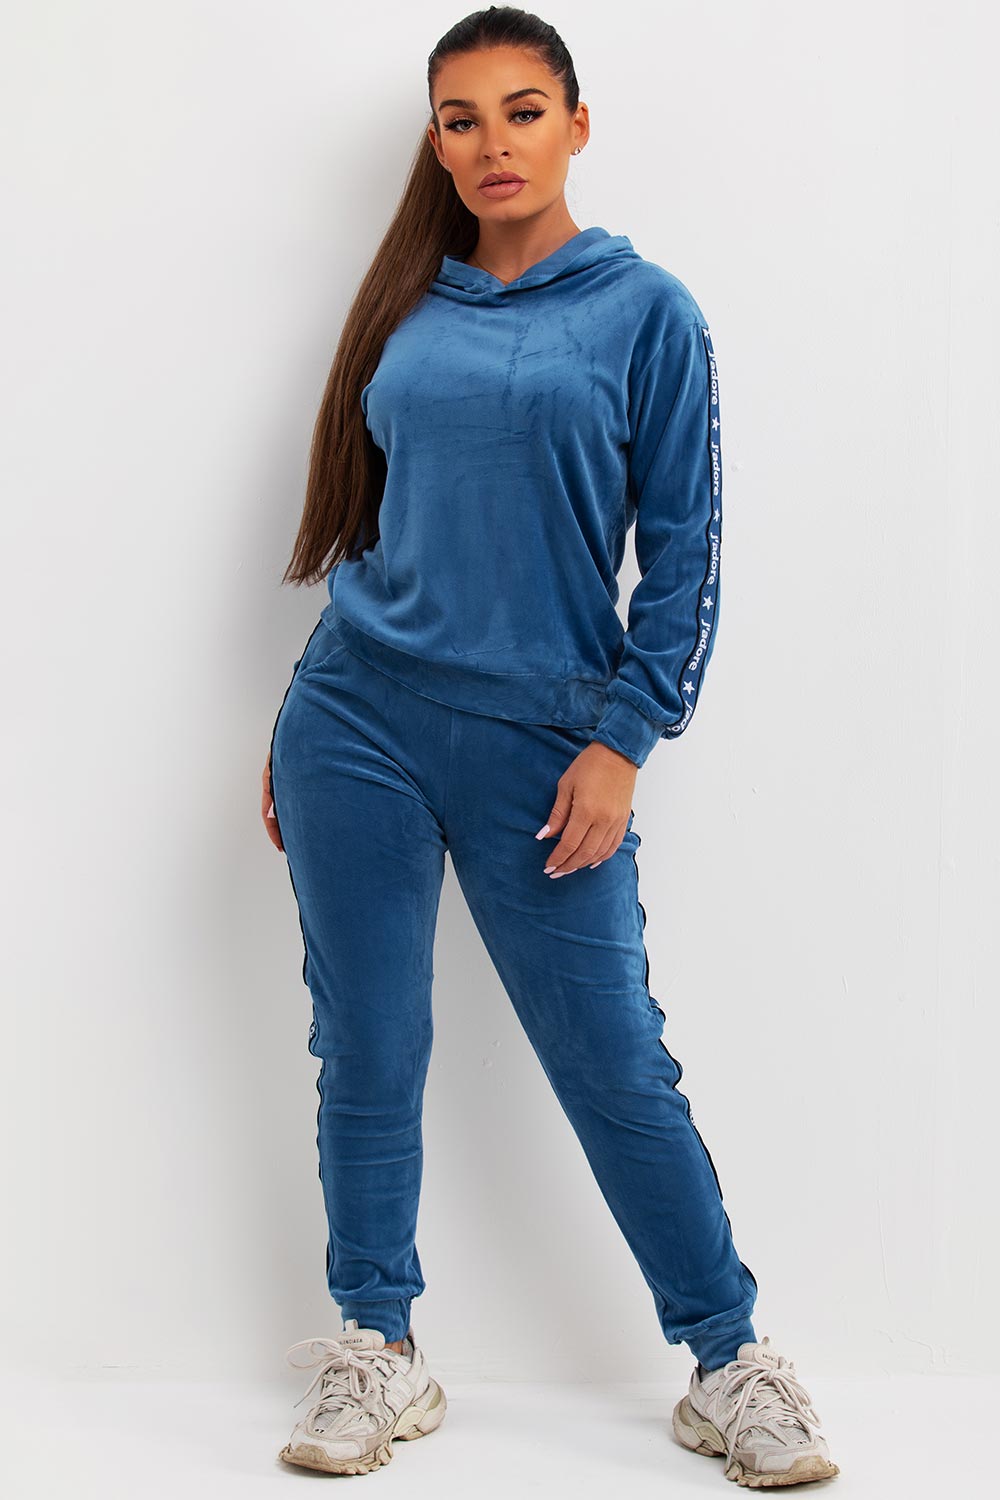 velour tracksuit loungewear co ord womens